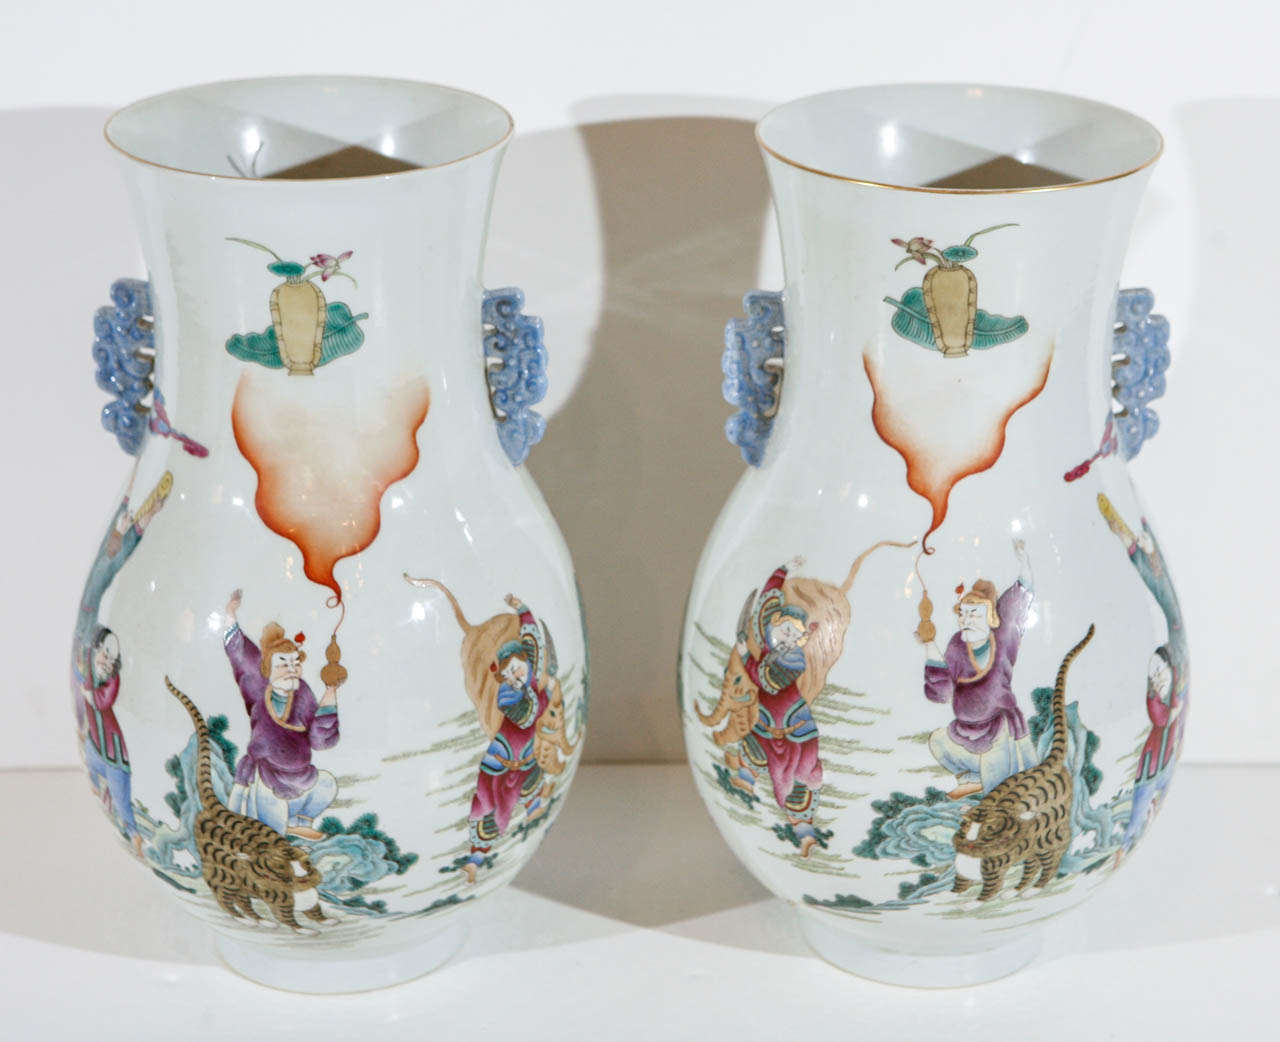 Pair of richly colored, hand-painted, parcel gilt, Chinese vases with exotic animals and costumed figures.